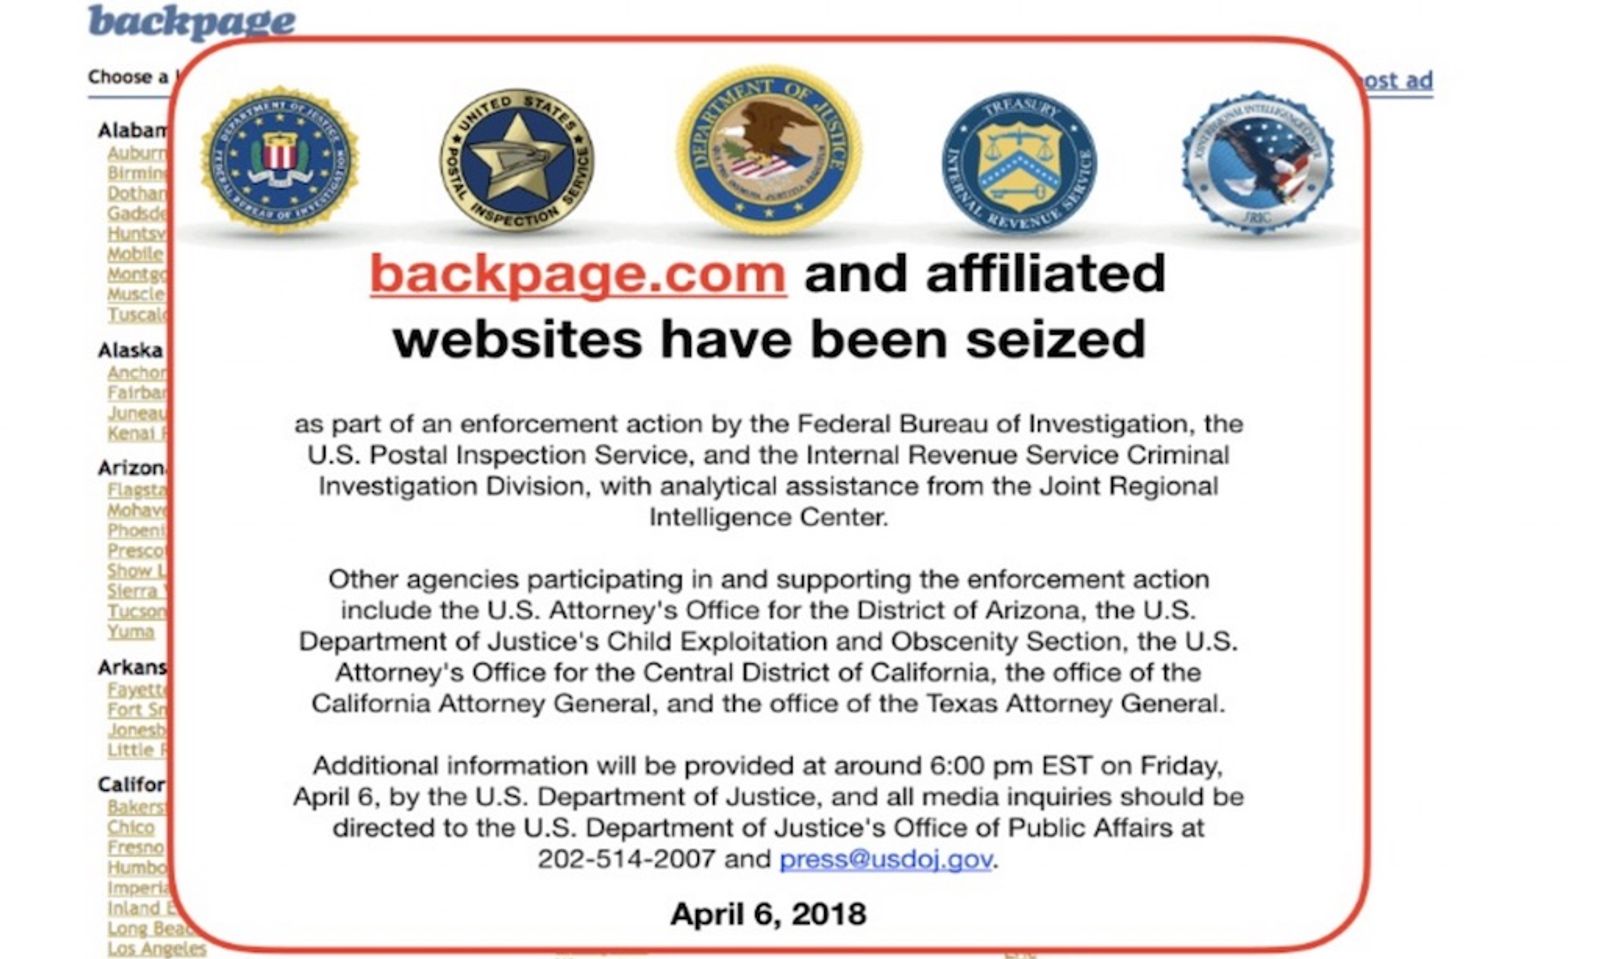 Backpage.com Indictment Unsealed, 93 Criminal Charges Detailed